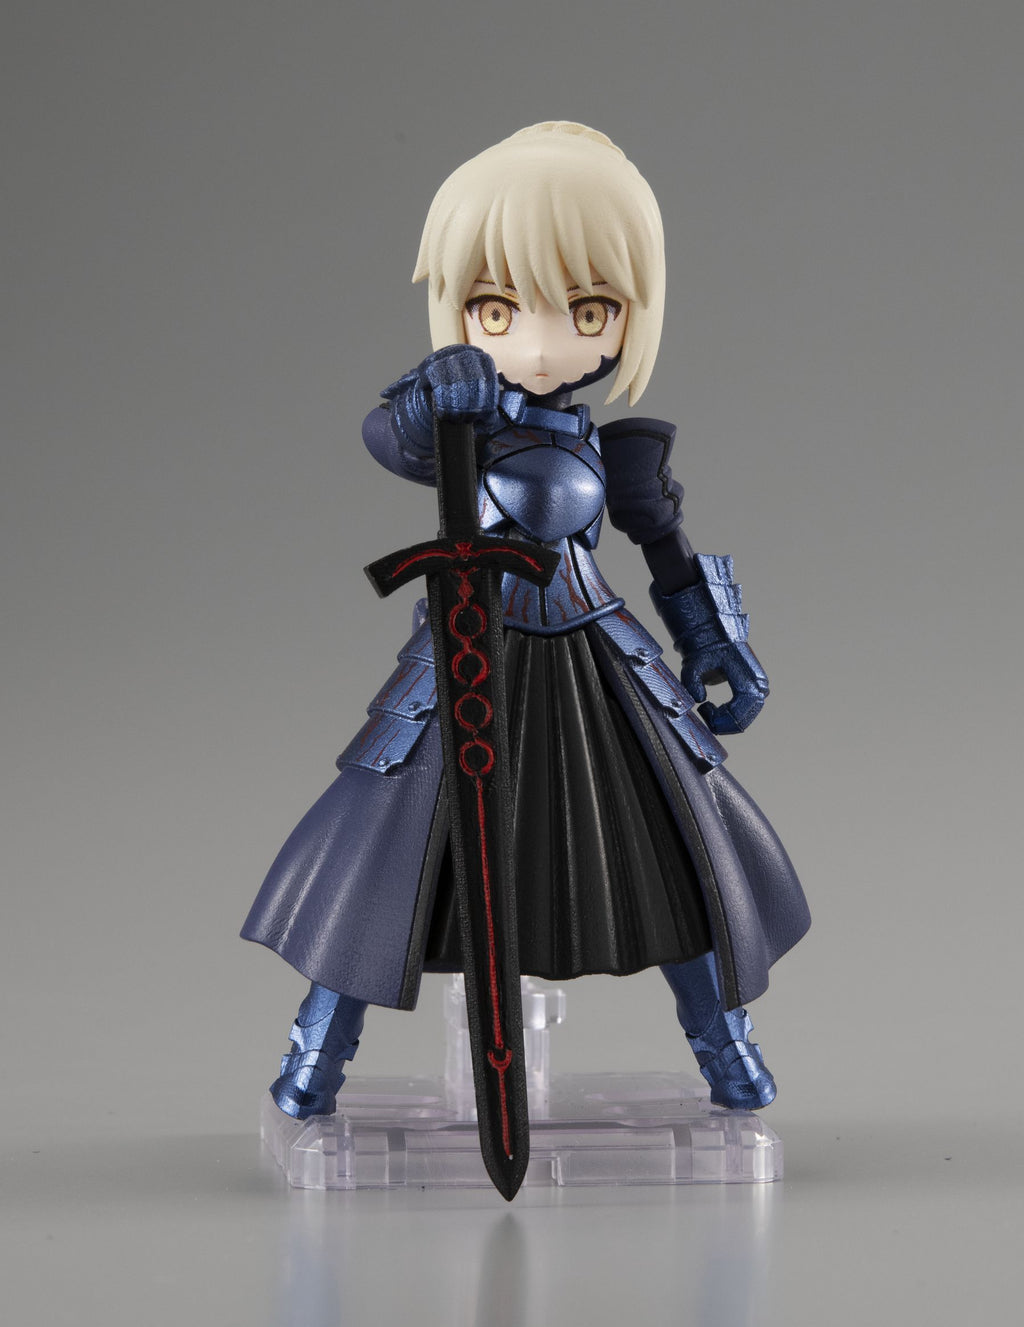 Desktop Army Fate Grand Order 4 Megahobby